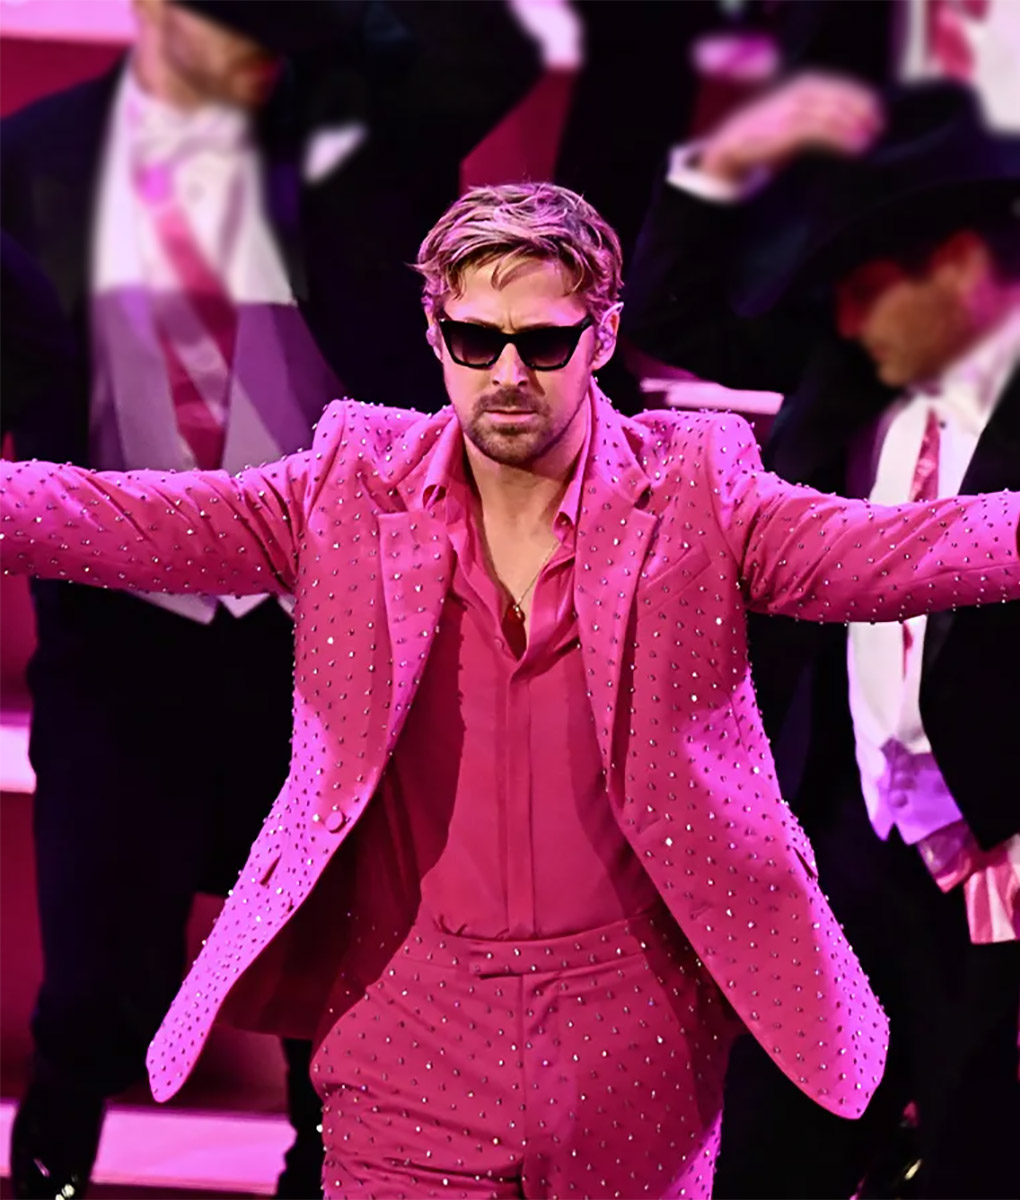 Ryan Gosling Oscars Bedazzled Pink Suit (1)